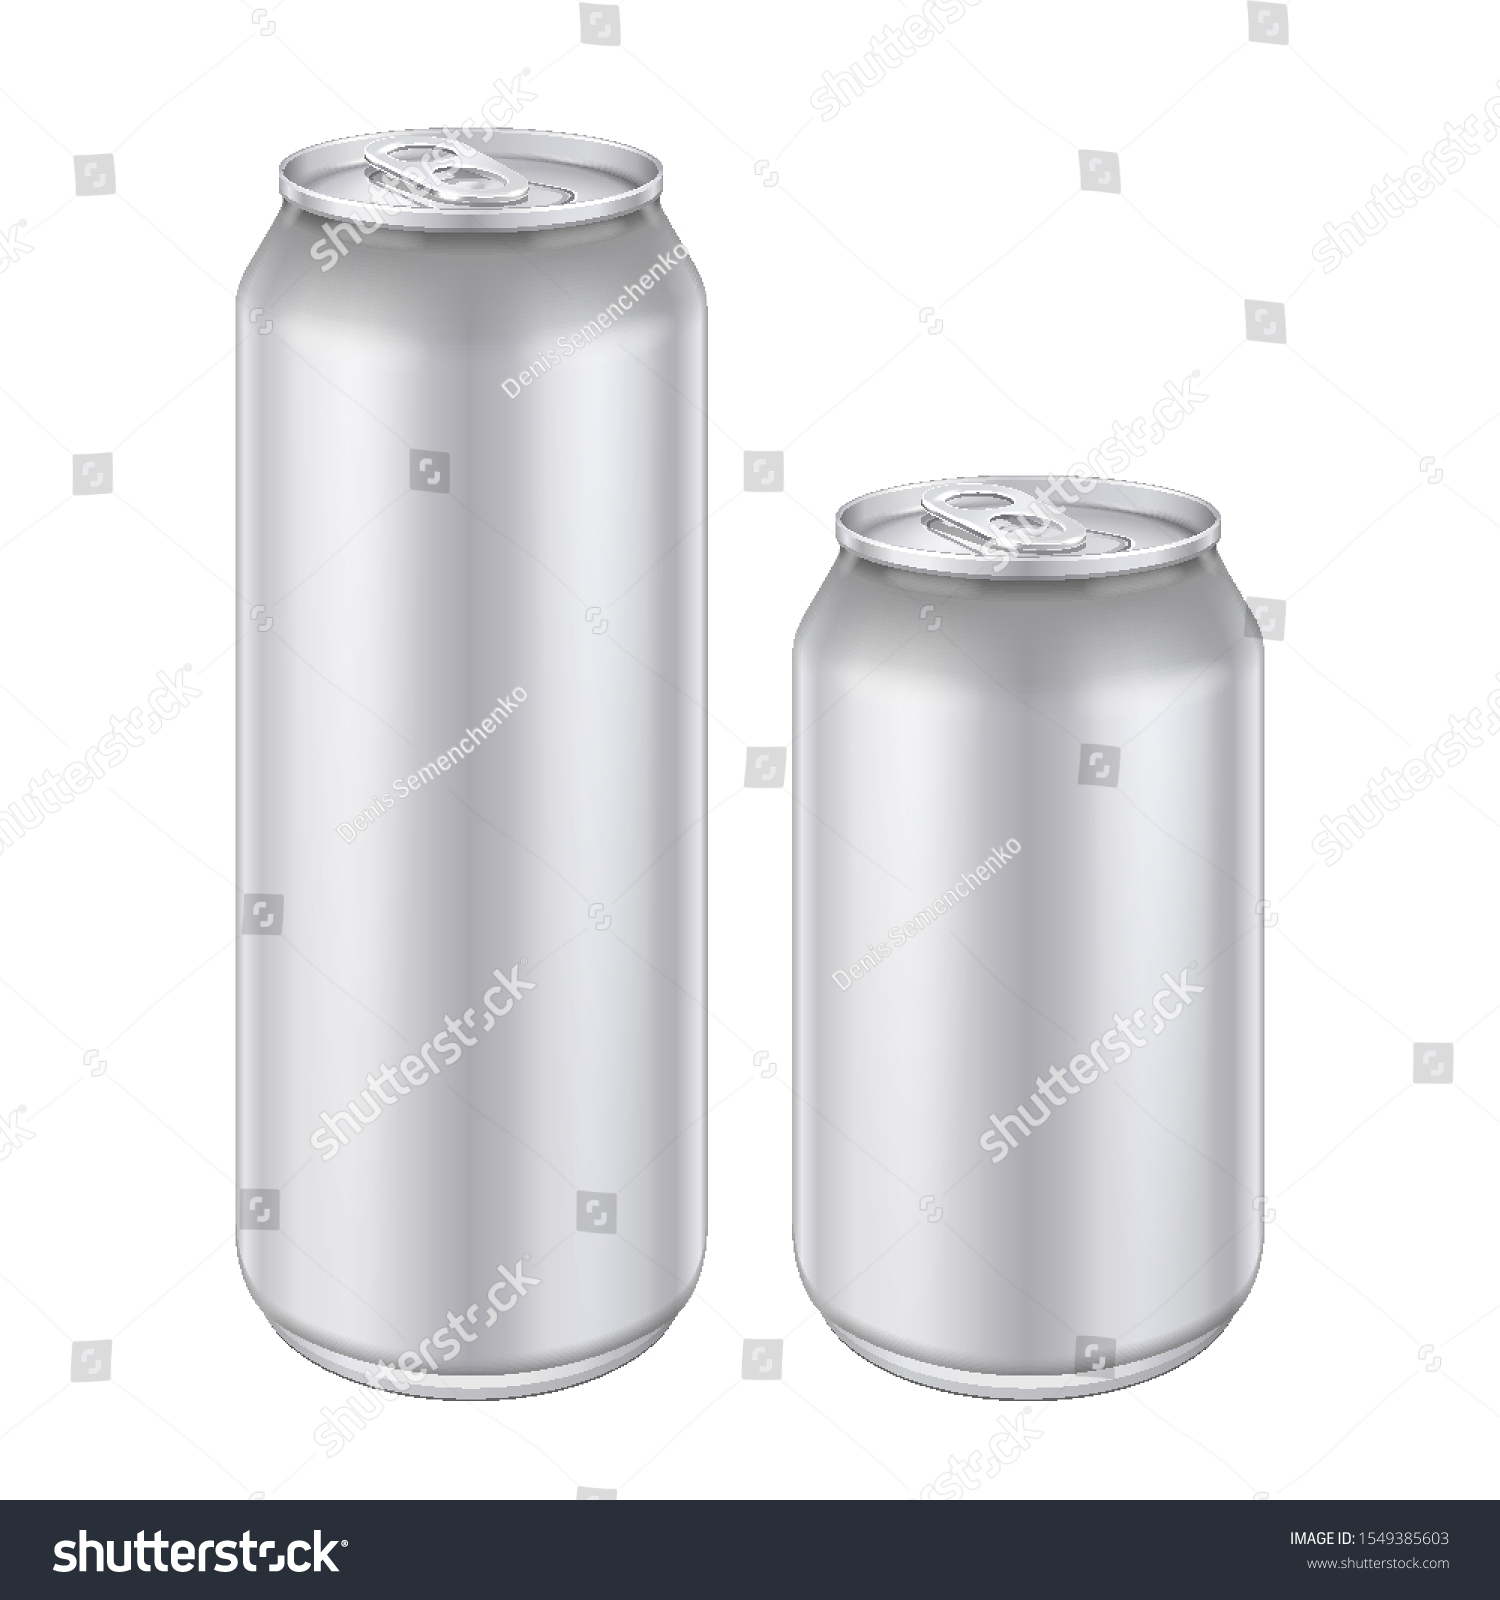 SVG of Mockup White Metal Aluminum Beverage Drink Can 500ml, 0,5L. Beer, Soda, Lemonade, Juice, Energy. Mock Up Template Ready For Your Design. Isolated On White Background. Product Packing. Vector EPS10 svg